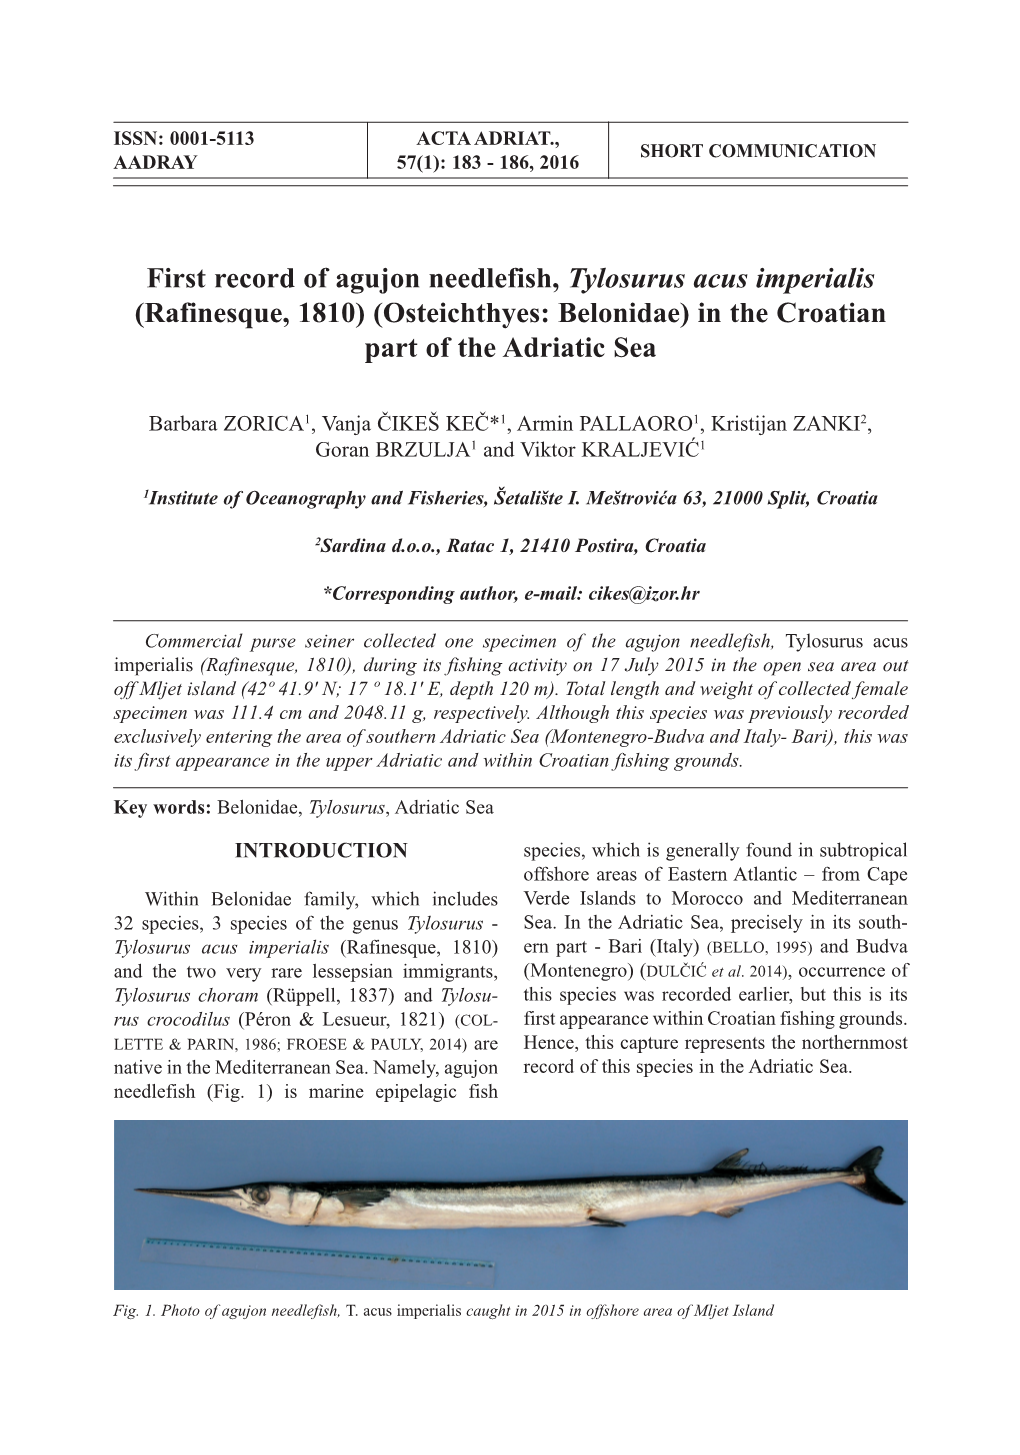 First Record of Agujon Needlefish, Tylosurus Acus Imperialis (Rafinesque, 1810) (Osteichthyes: Belonidae) in the Croatian Part of the Adriatic Sea